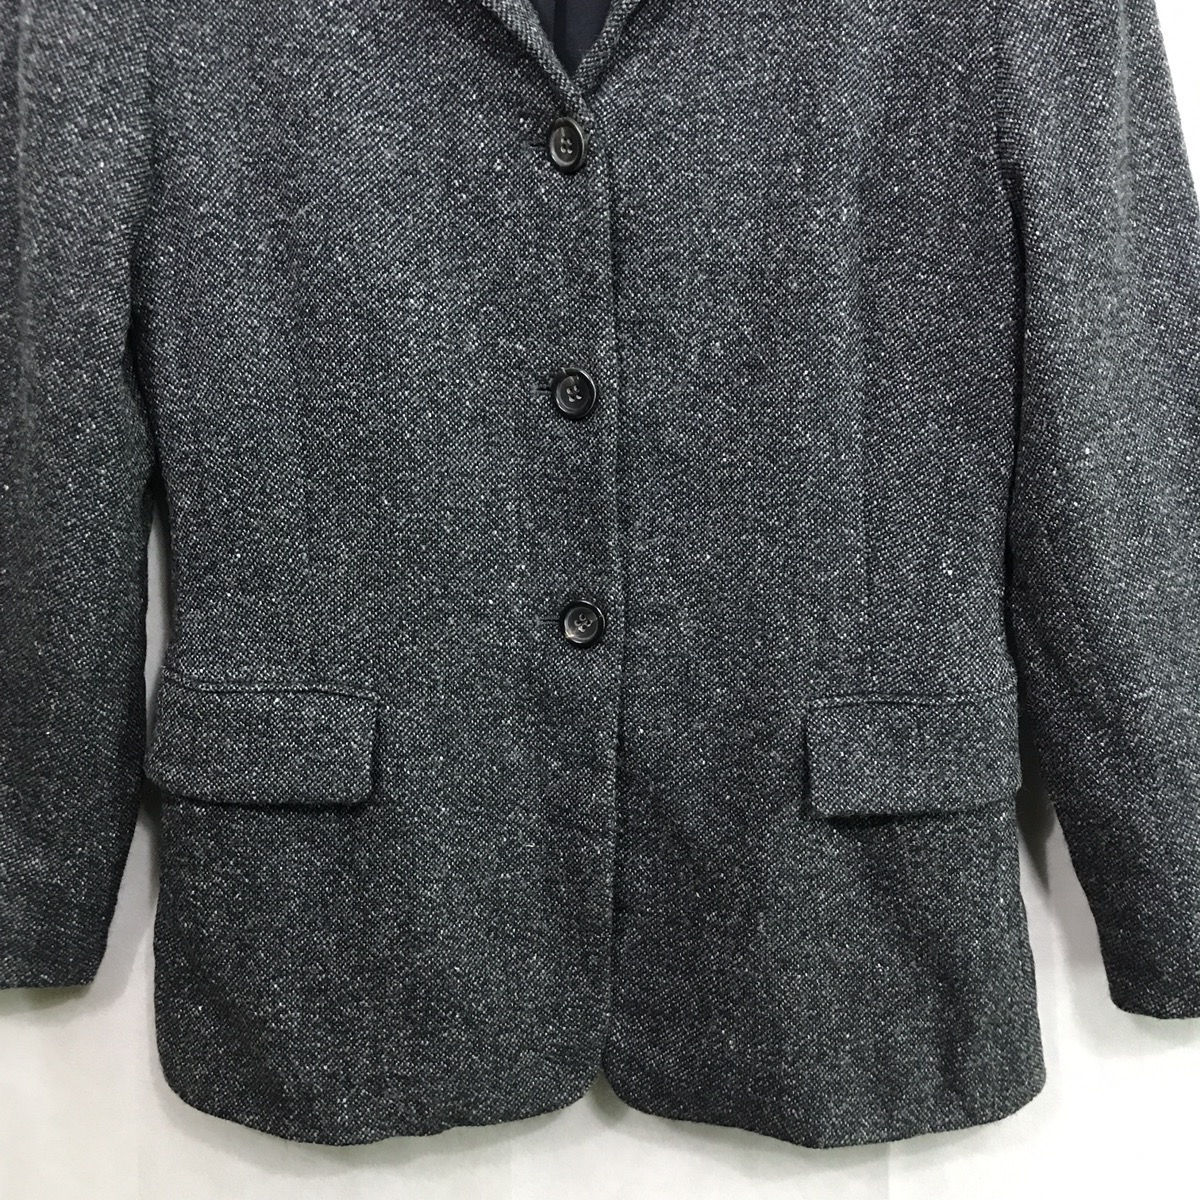 Jacket made in germany - 5